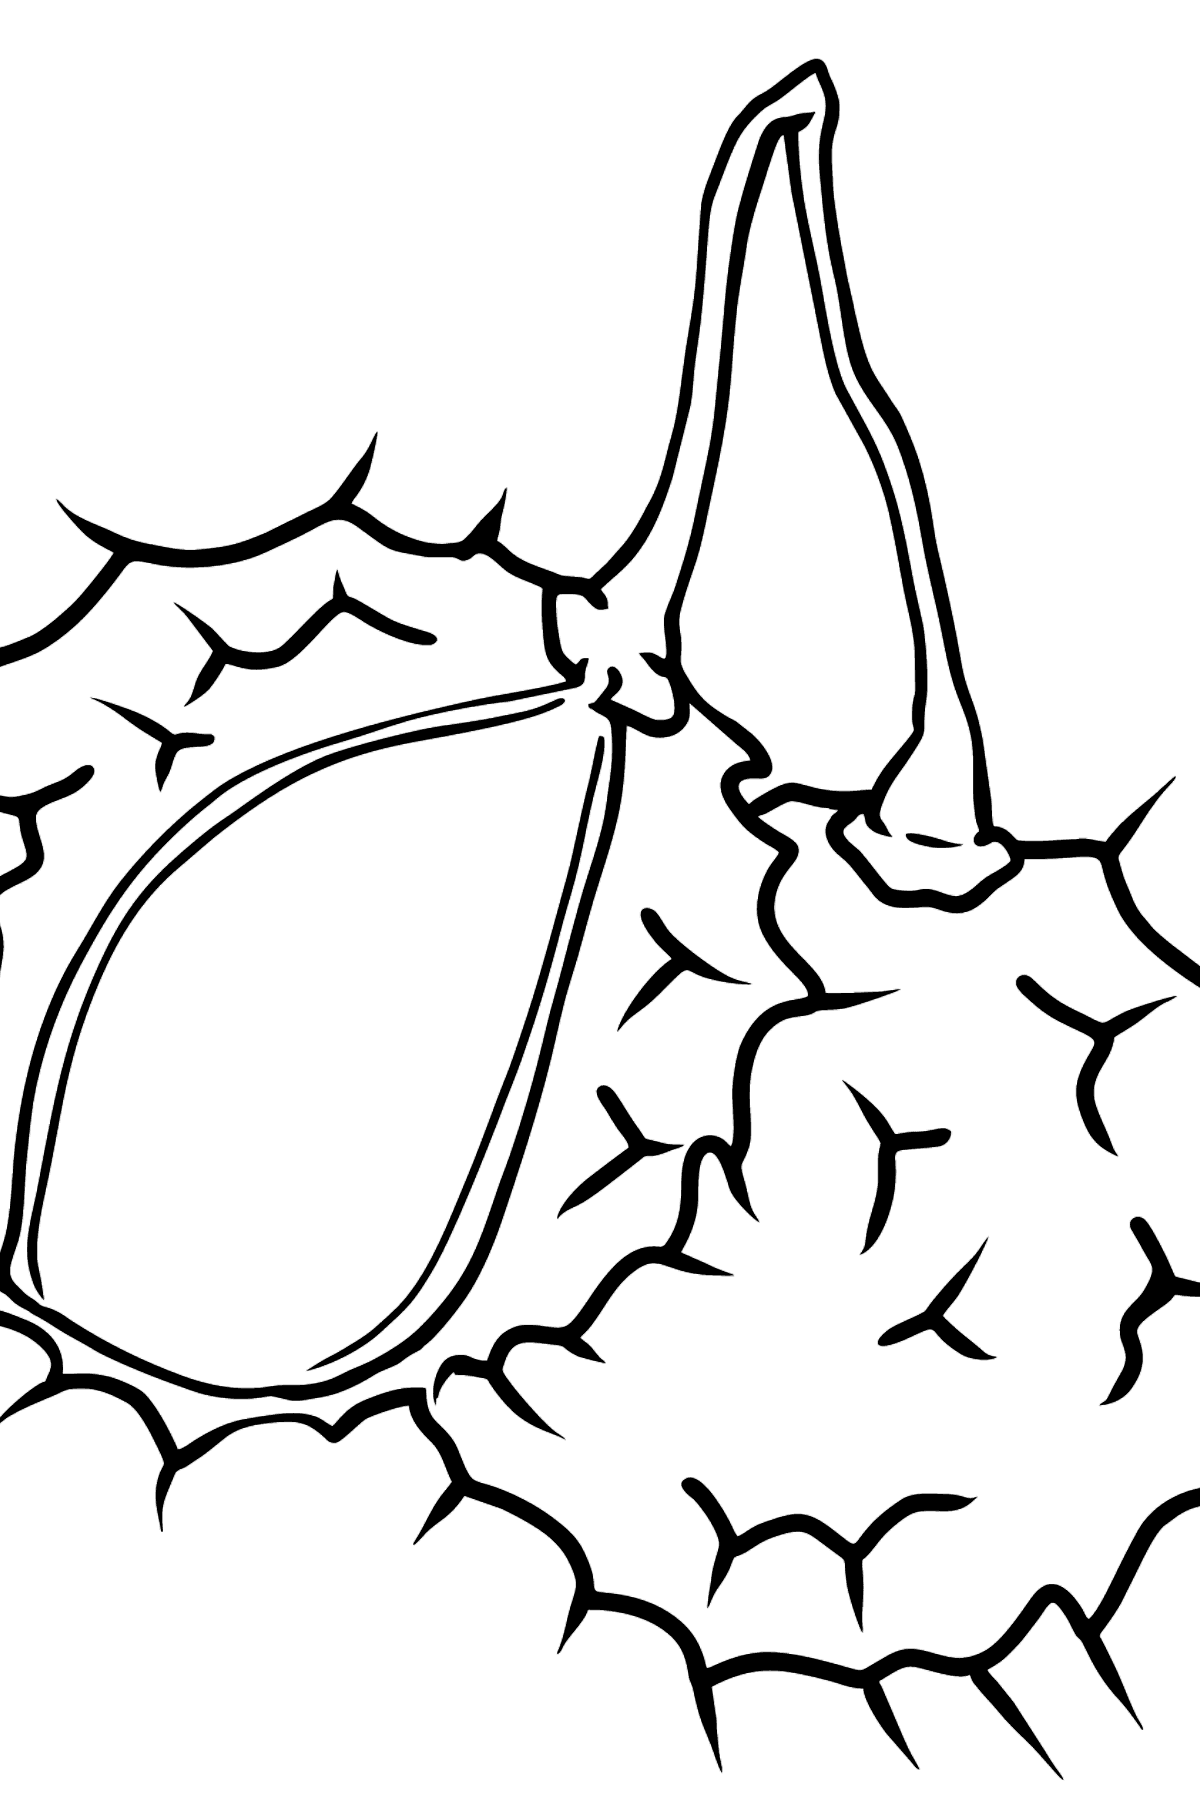 Rambutan coloring page - Coloring Pages for Kids